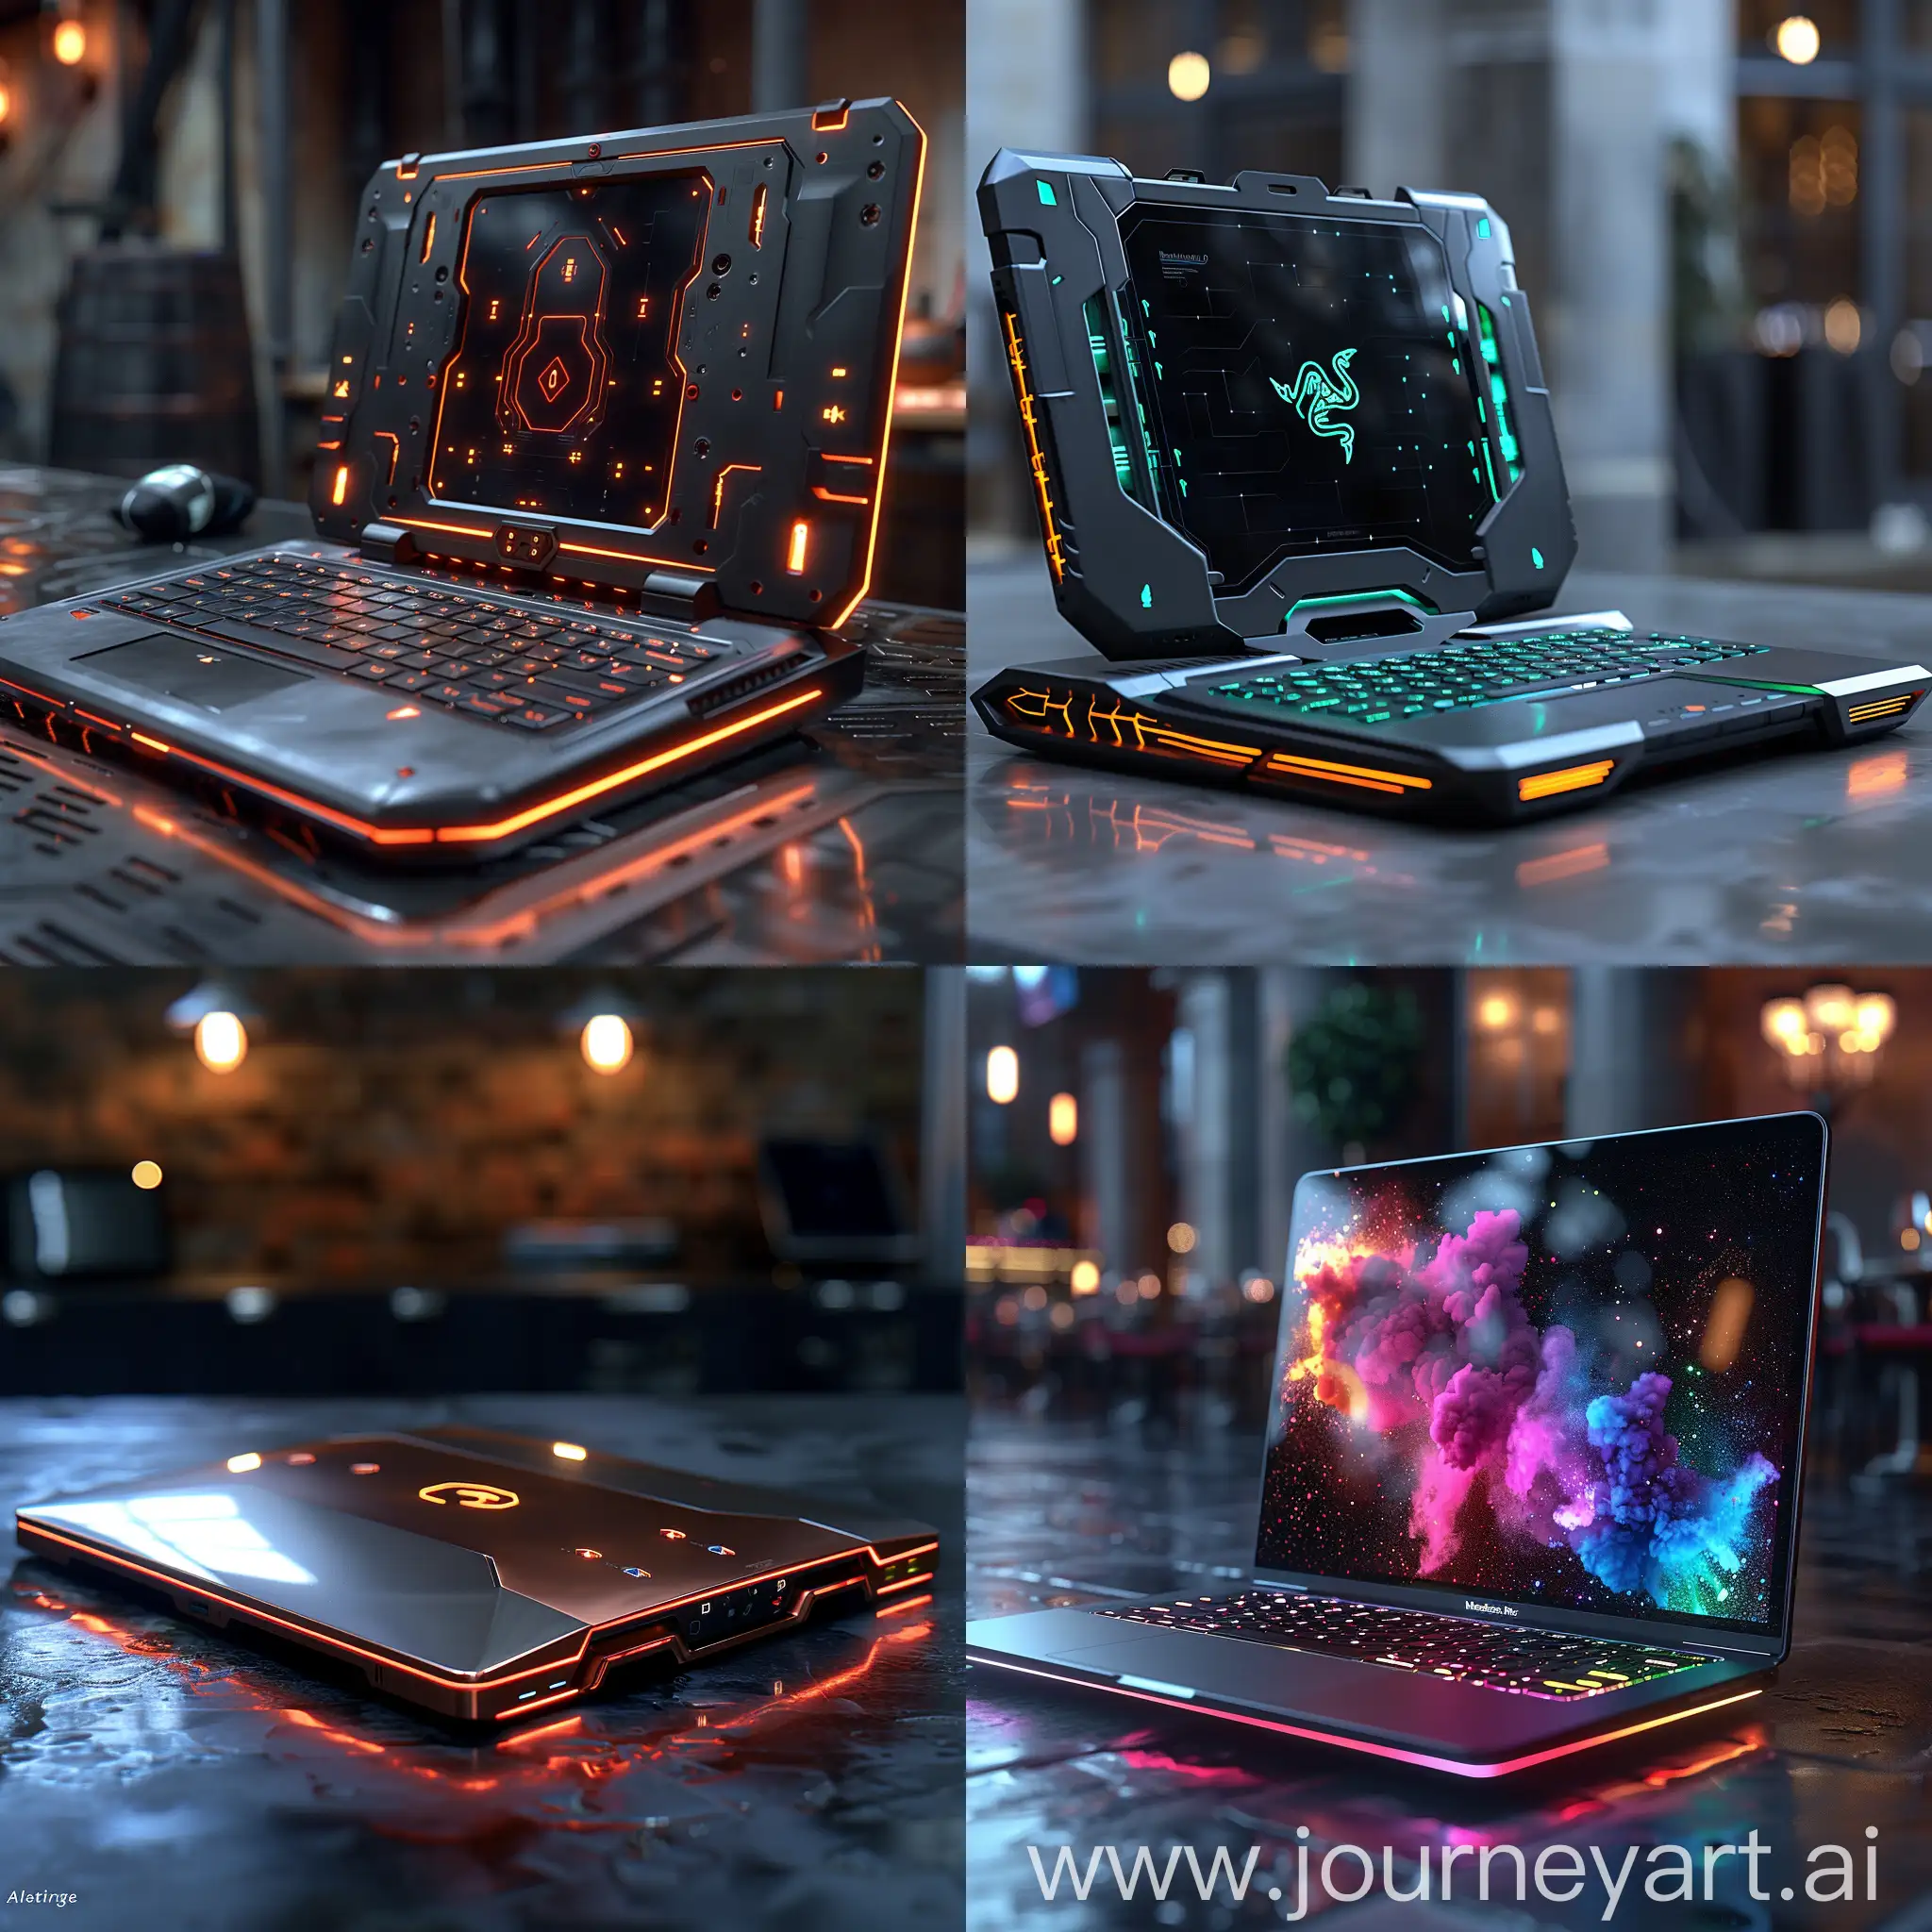 Futuristic-Laptop-with-Insanely-Ultramodern-Design